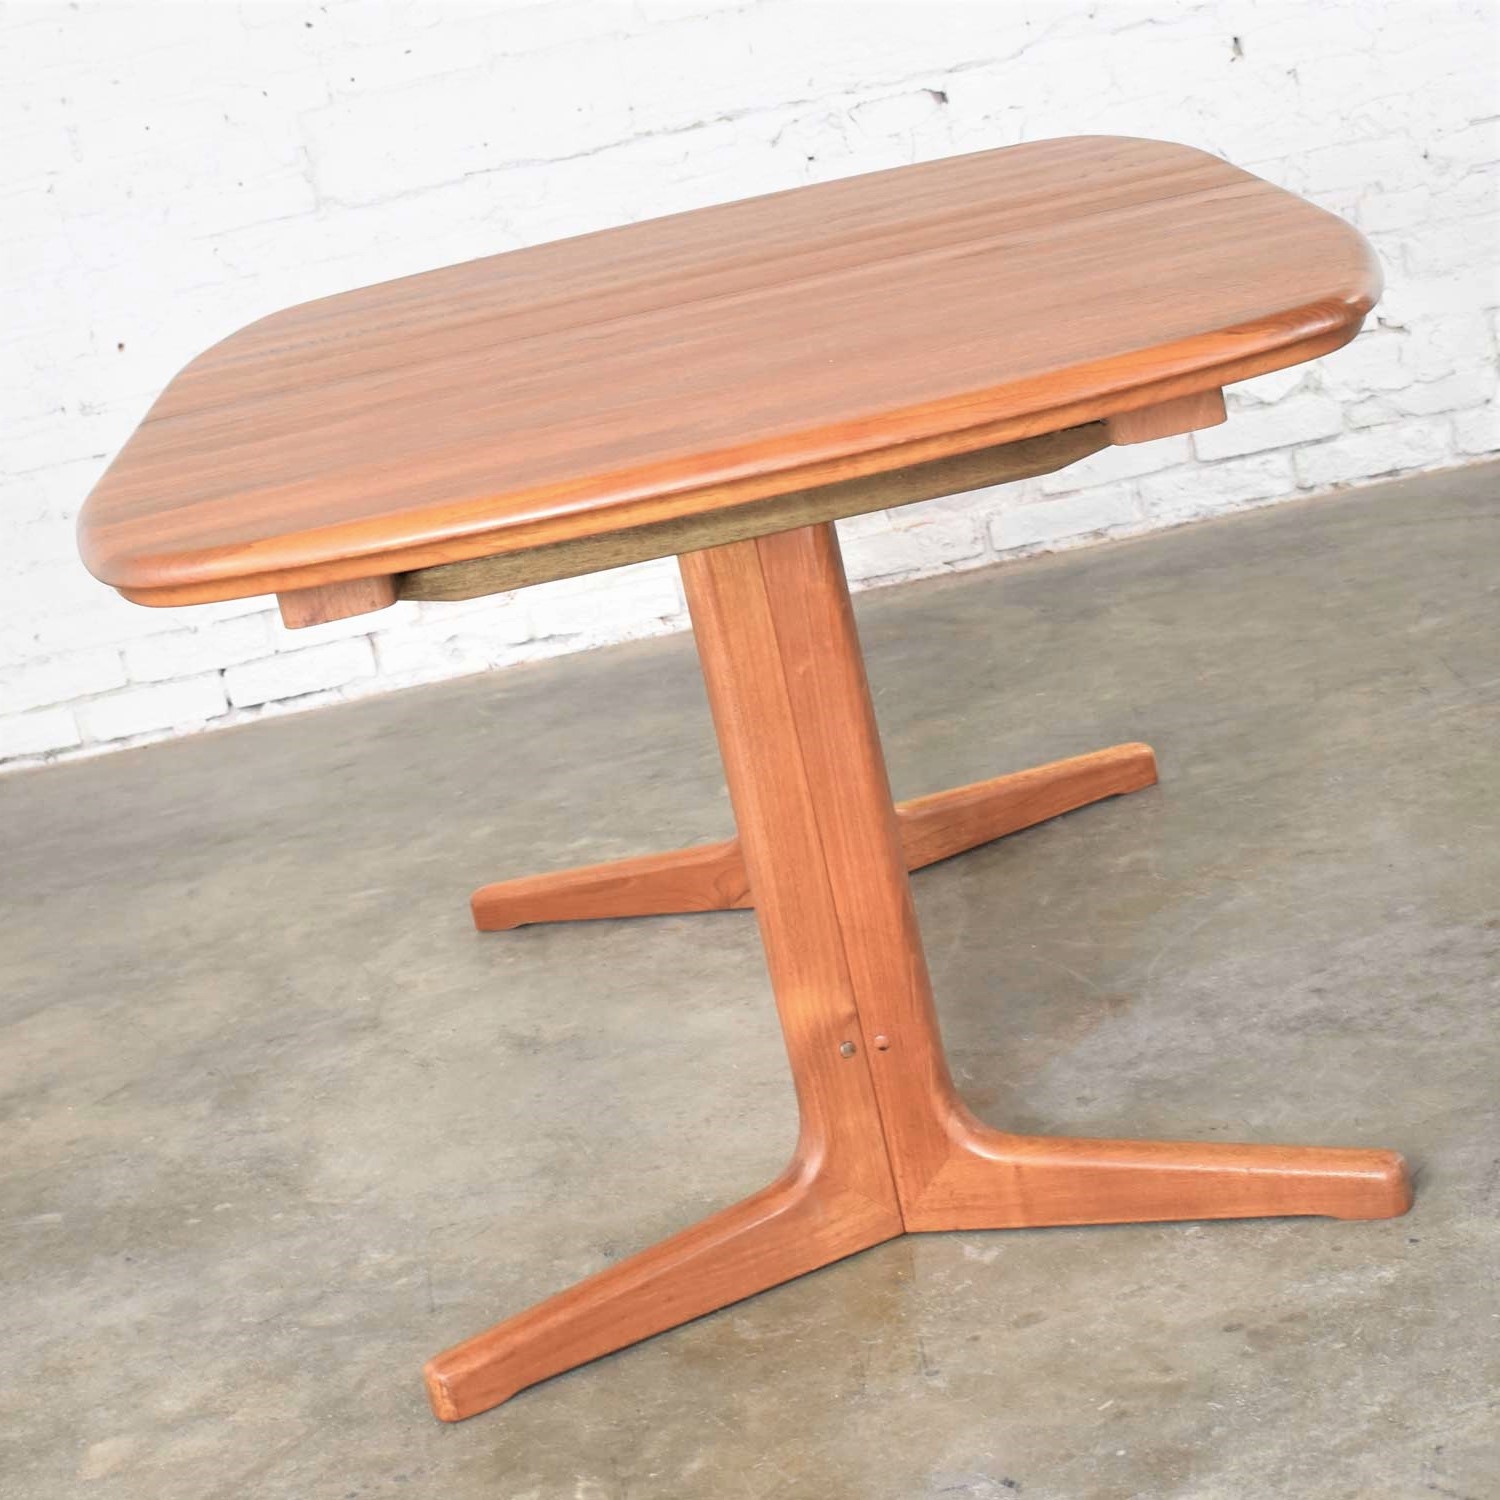 Vintage Scandinavian Modern Teak Oval Expanding Dining Table Attributed to Dyrlund 2 Leaves